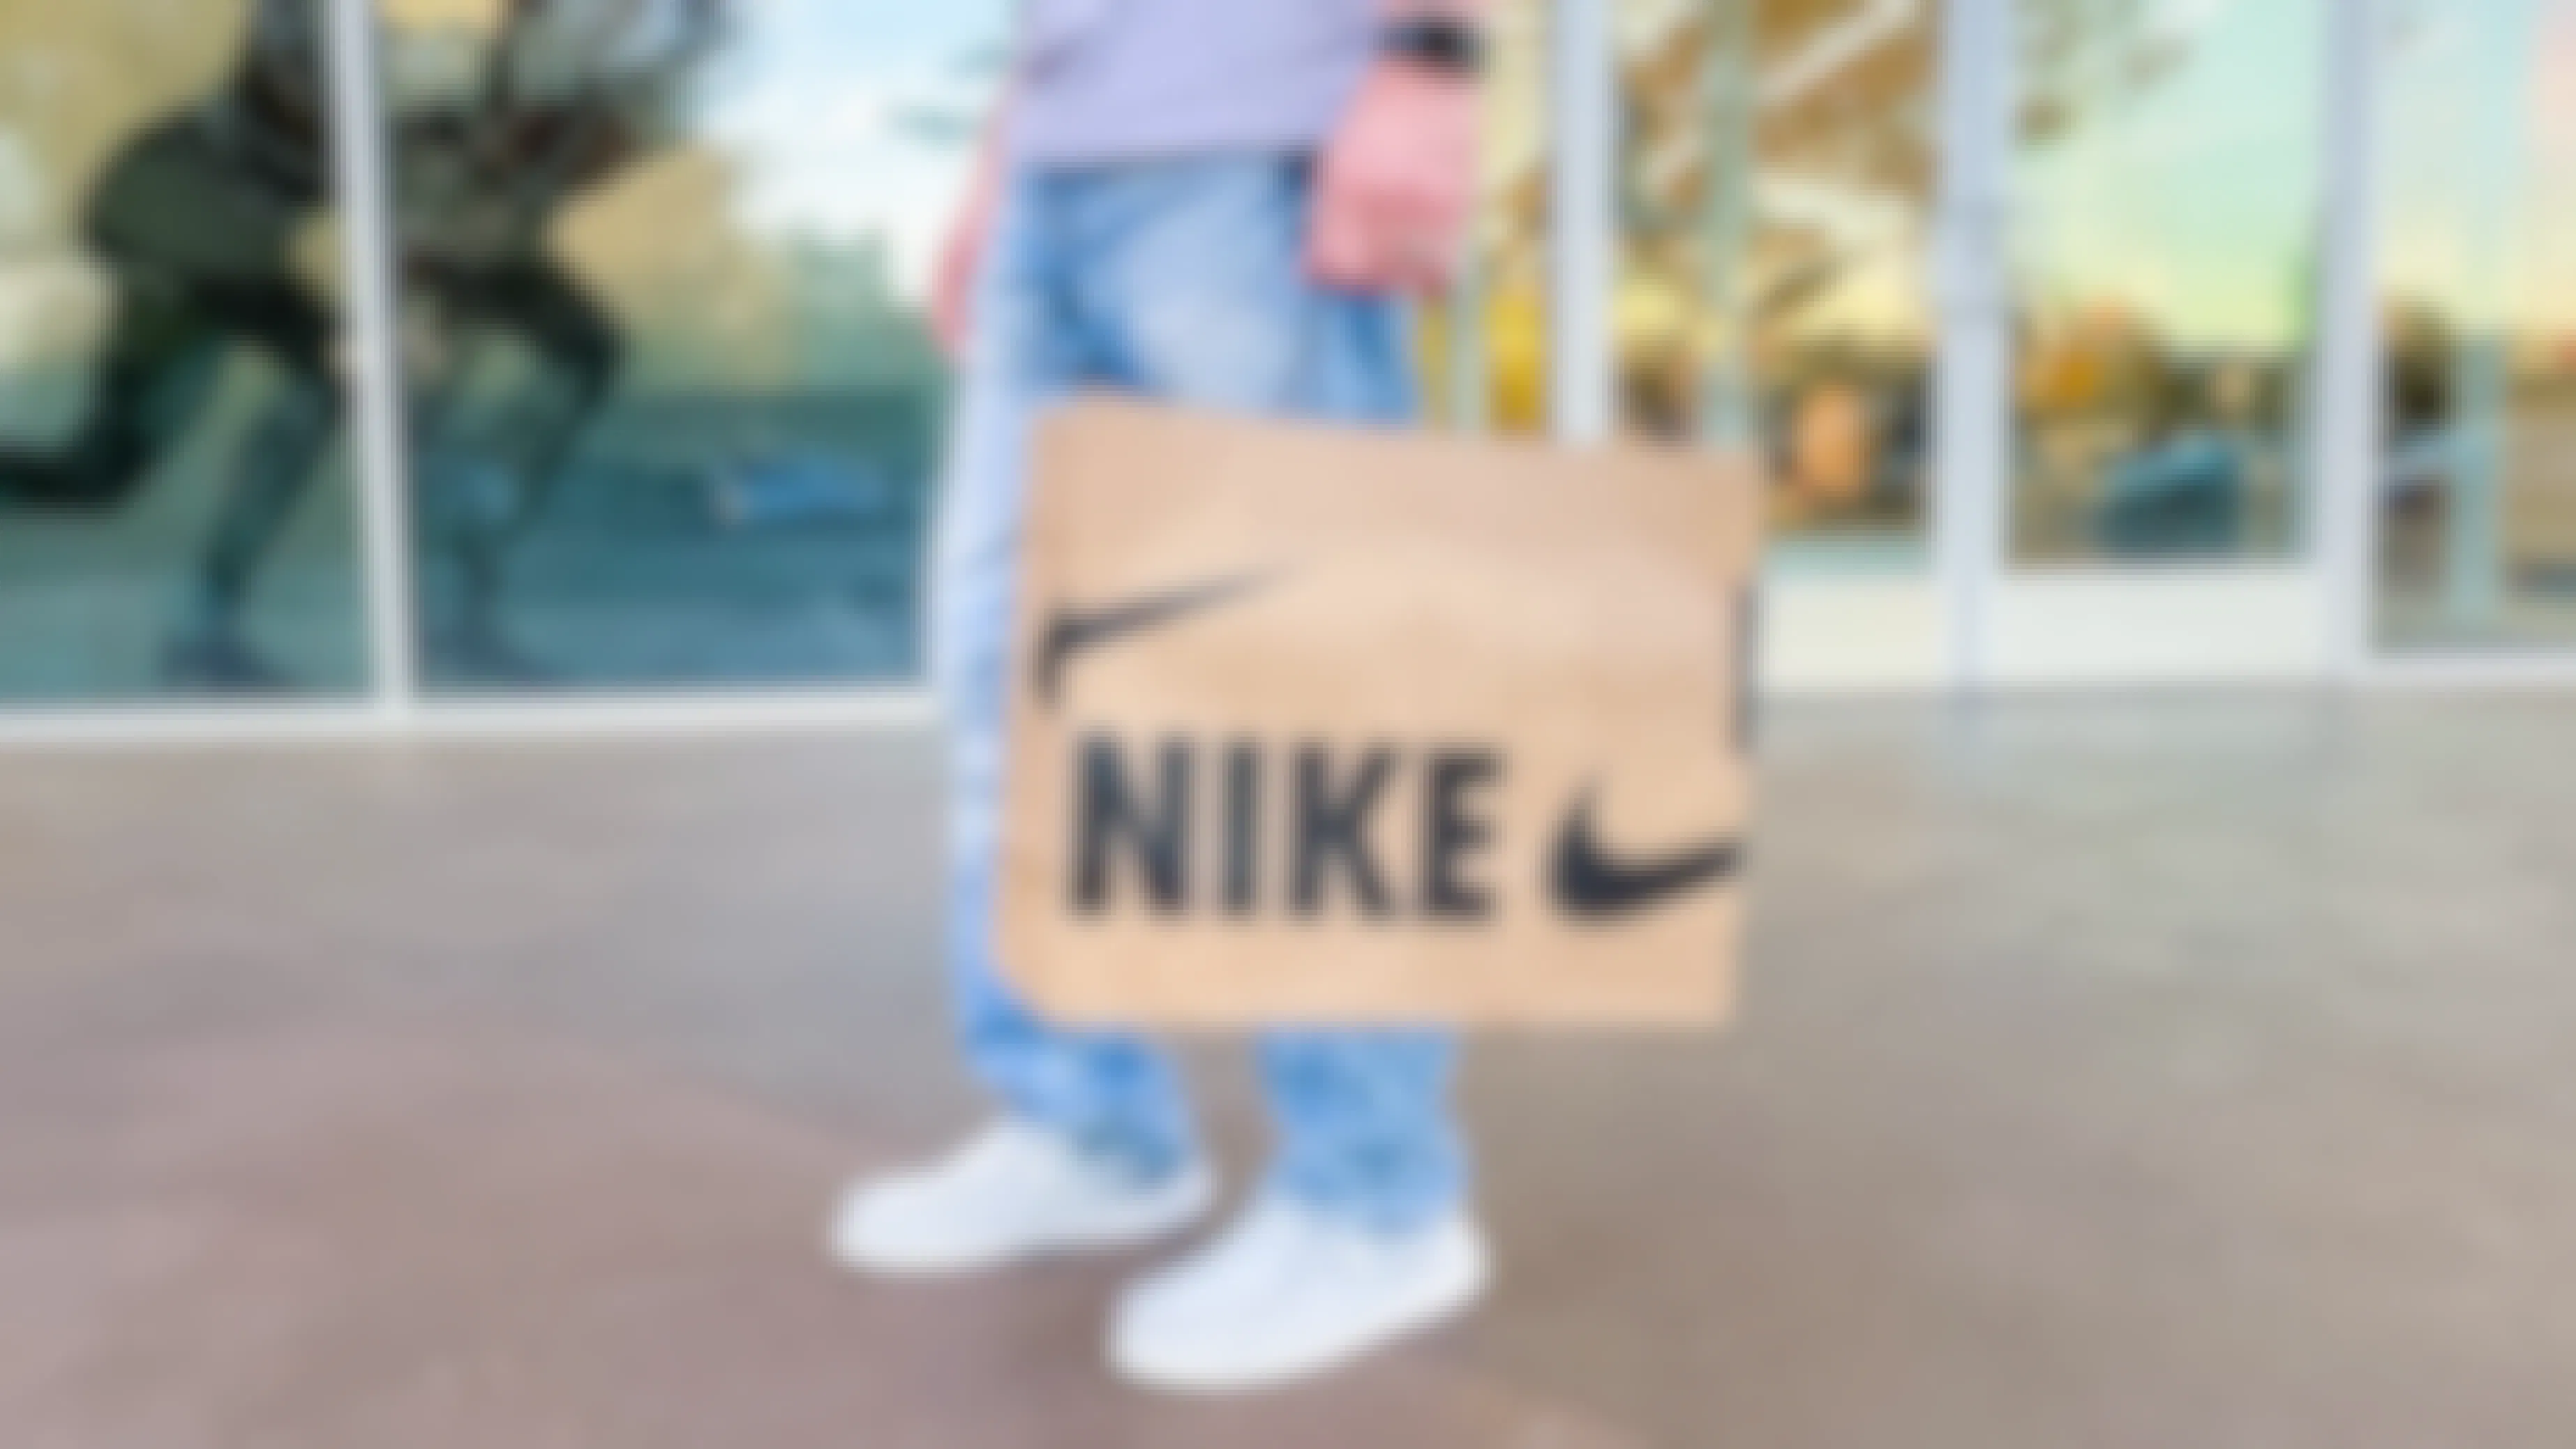 Nike Military Discount: 10% Off and Free Shipping to APO/FPO Addresses